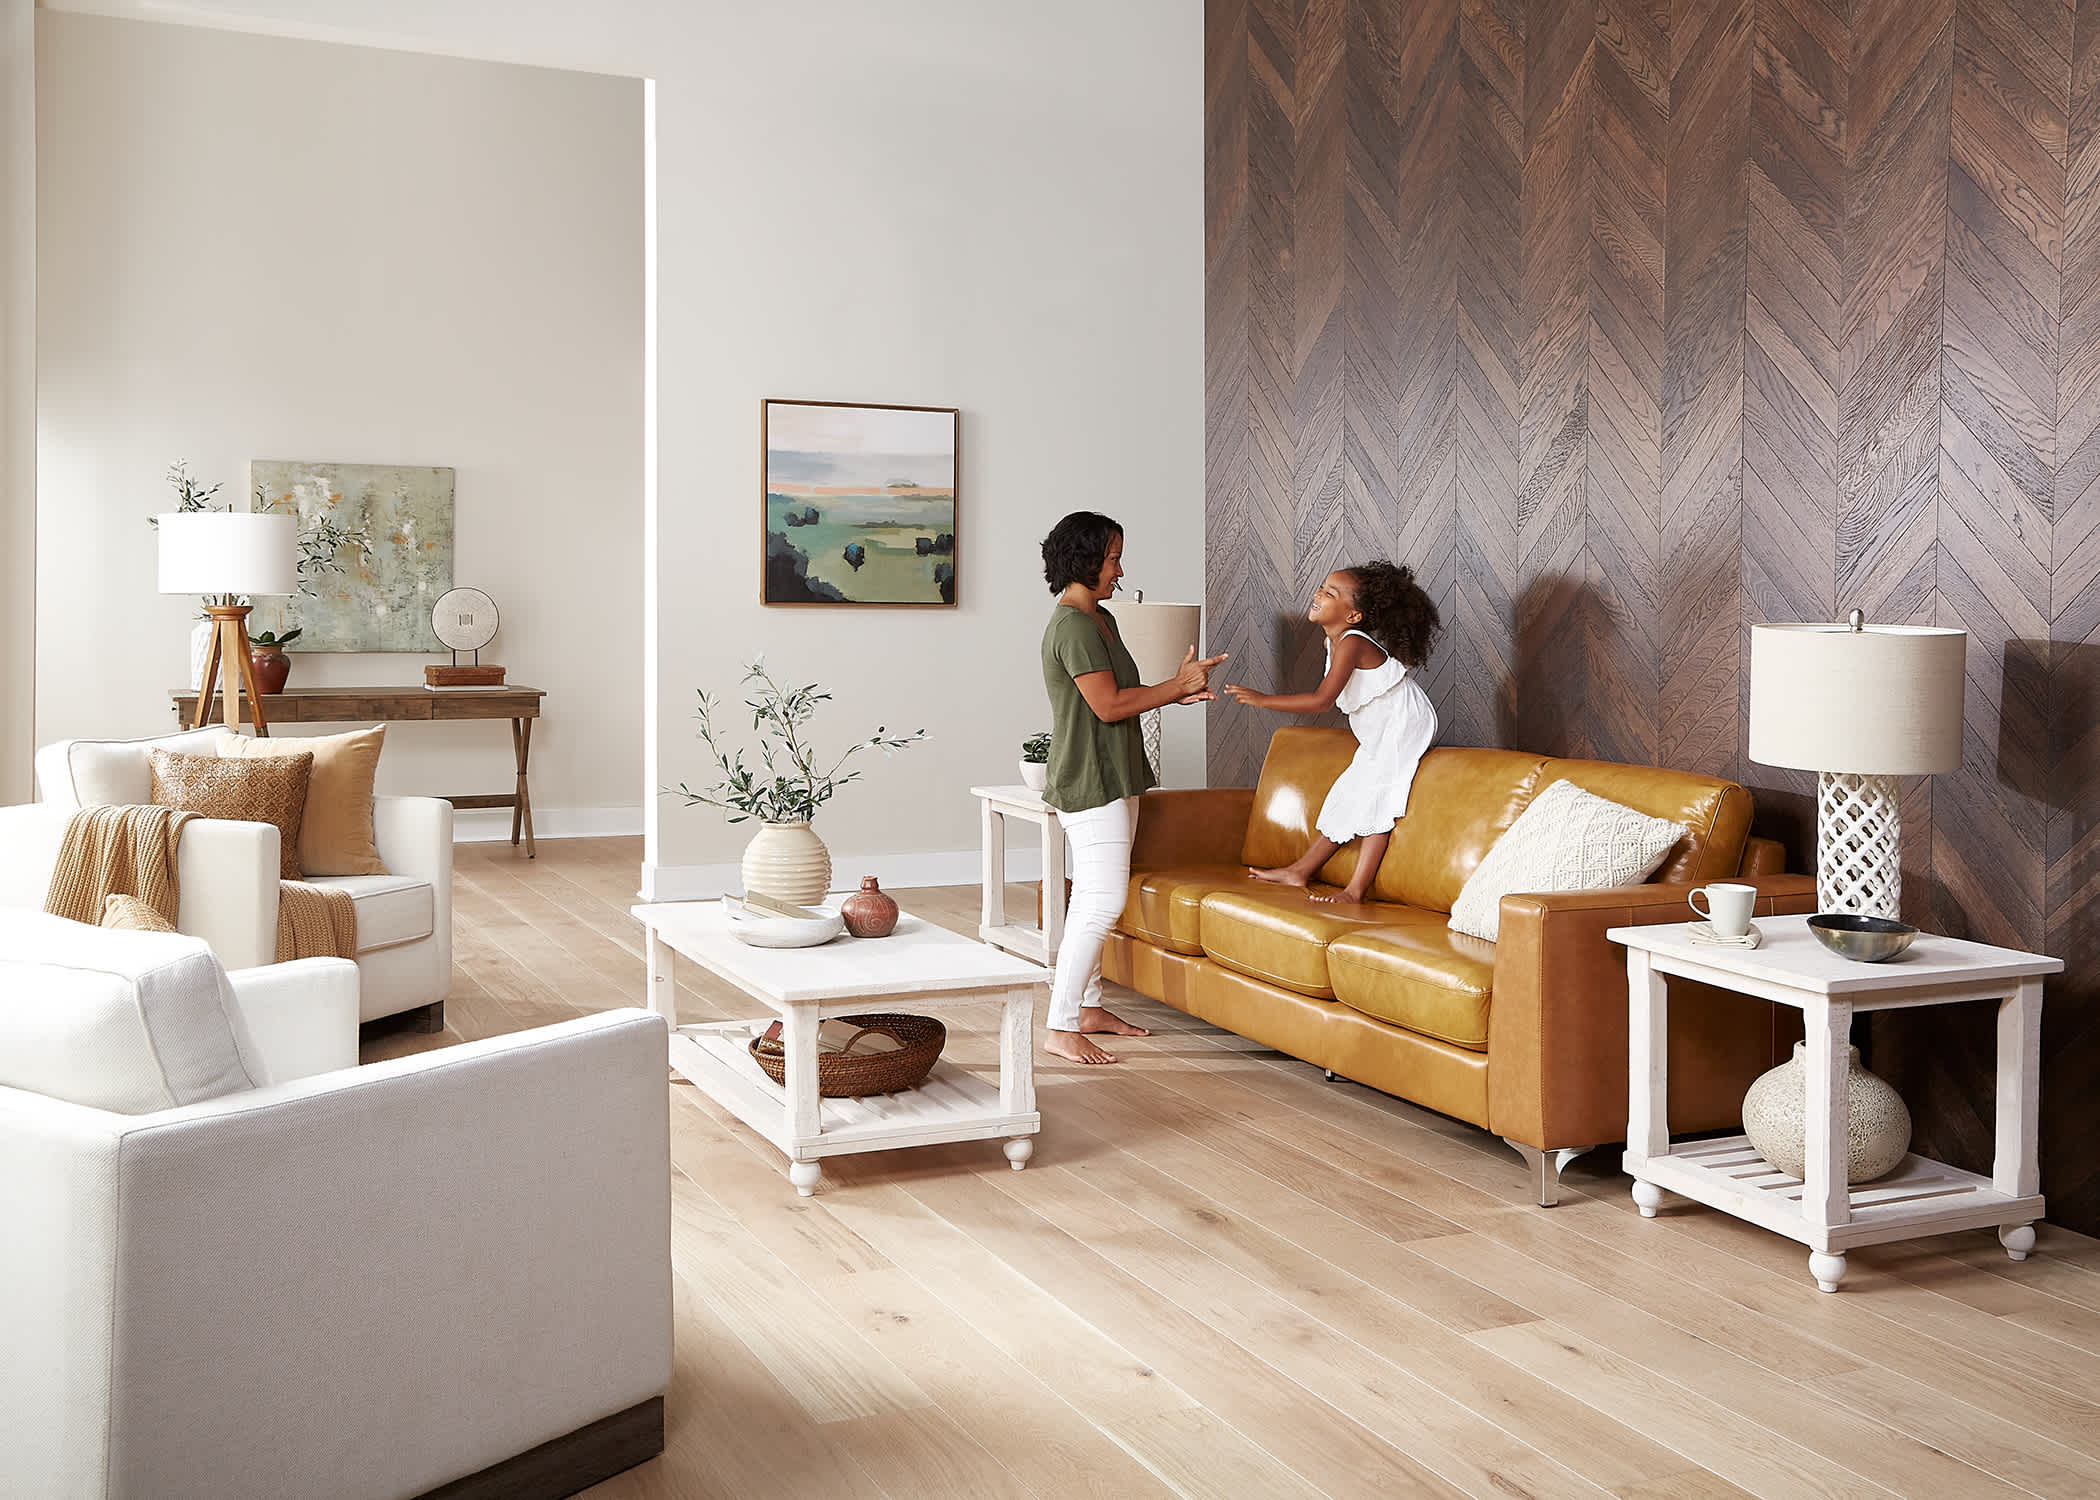 blonde hardwood floors in living room plus dark brown chevron hardwood floor on accent wall behind caramel leather sofa with woman in green shirt playing with toddler in white dress standing on the sofa